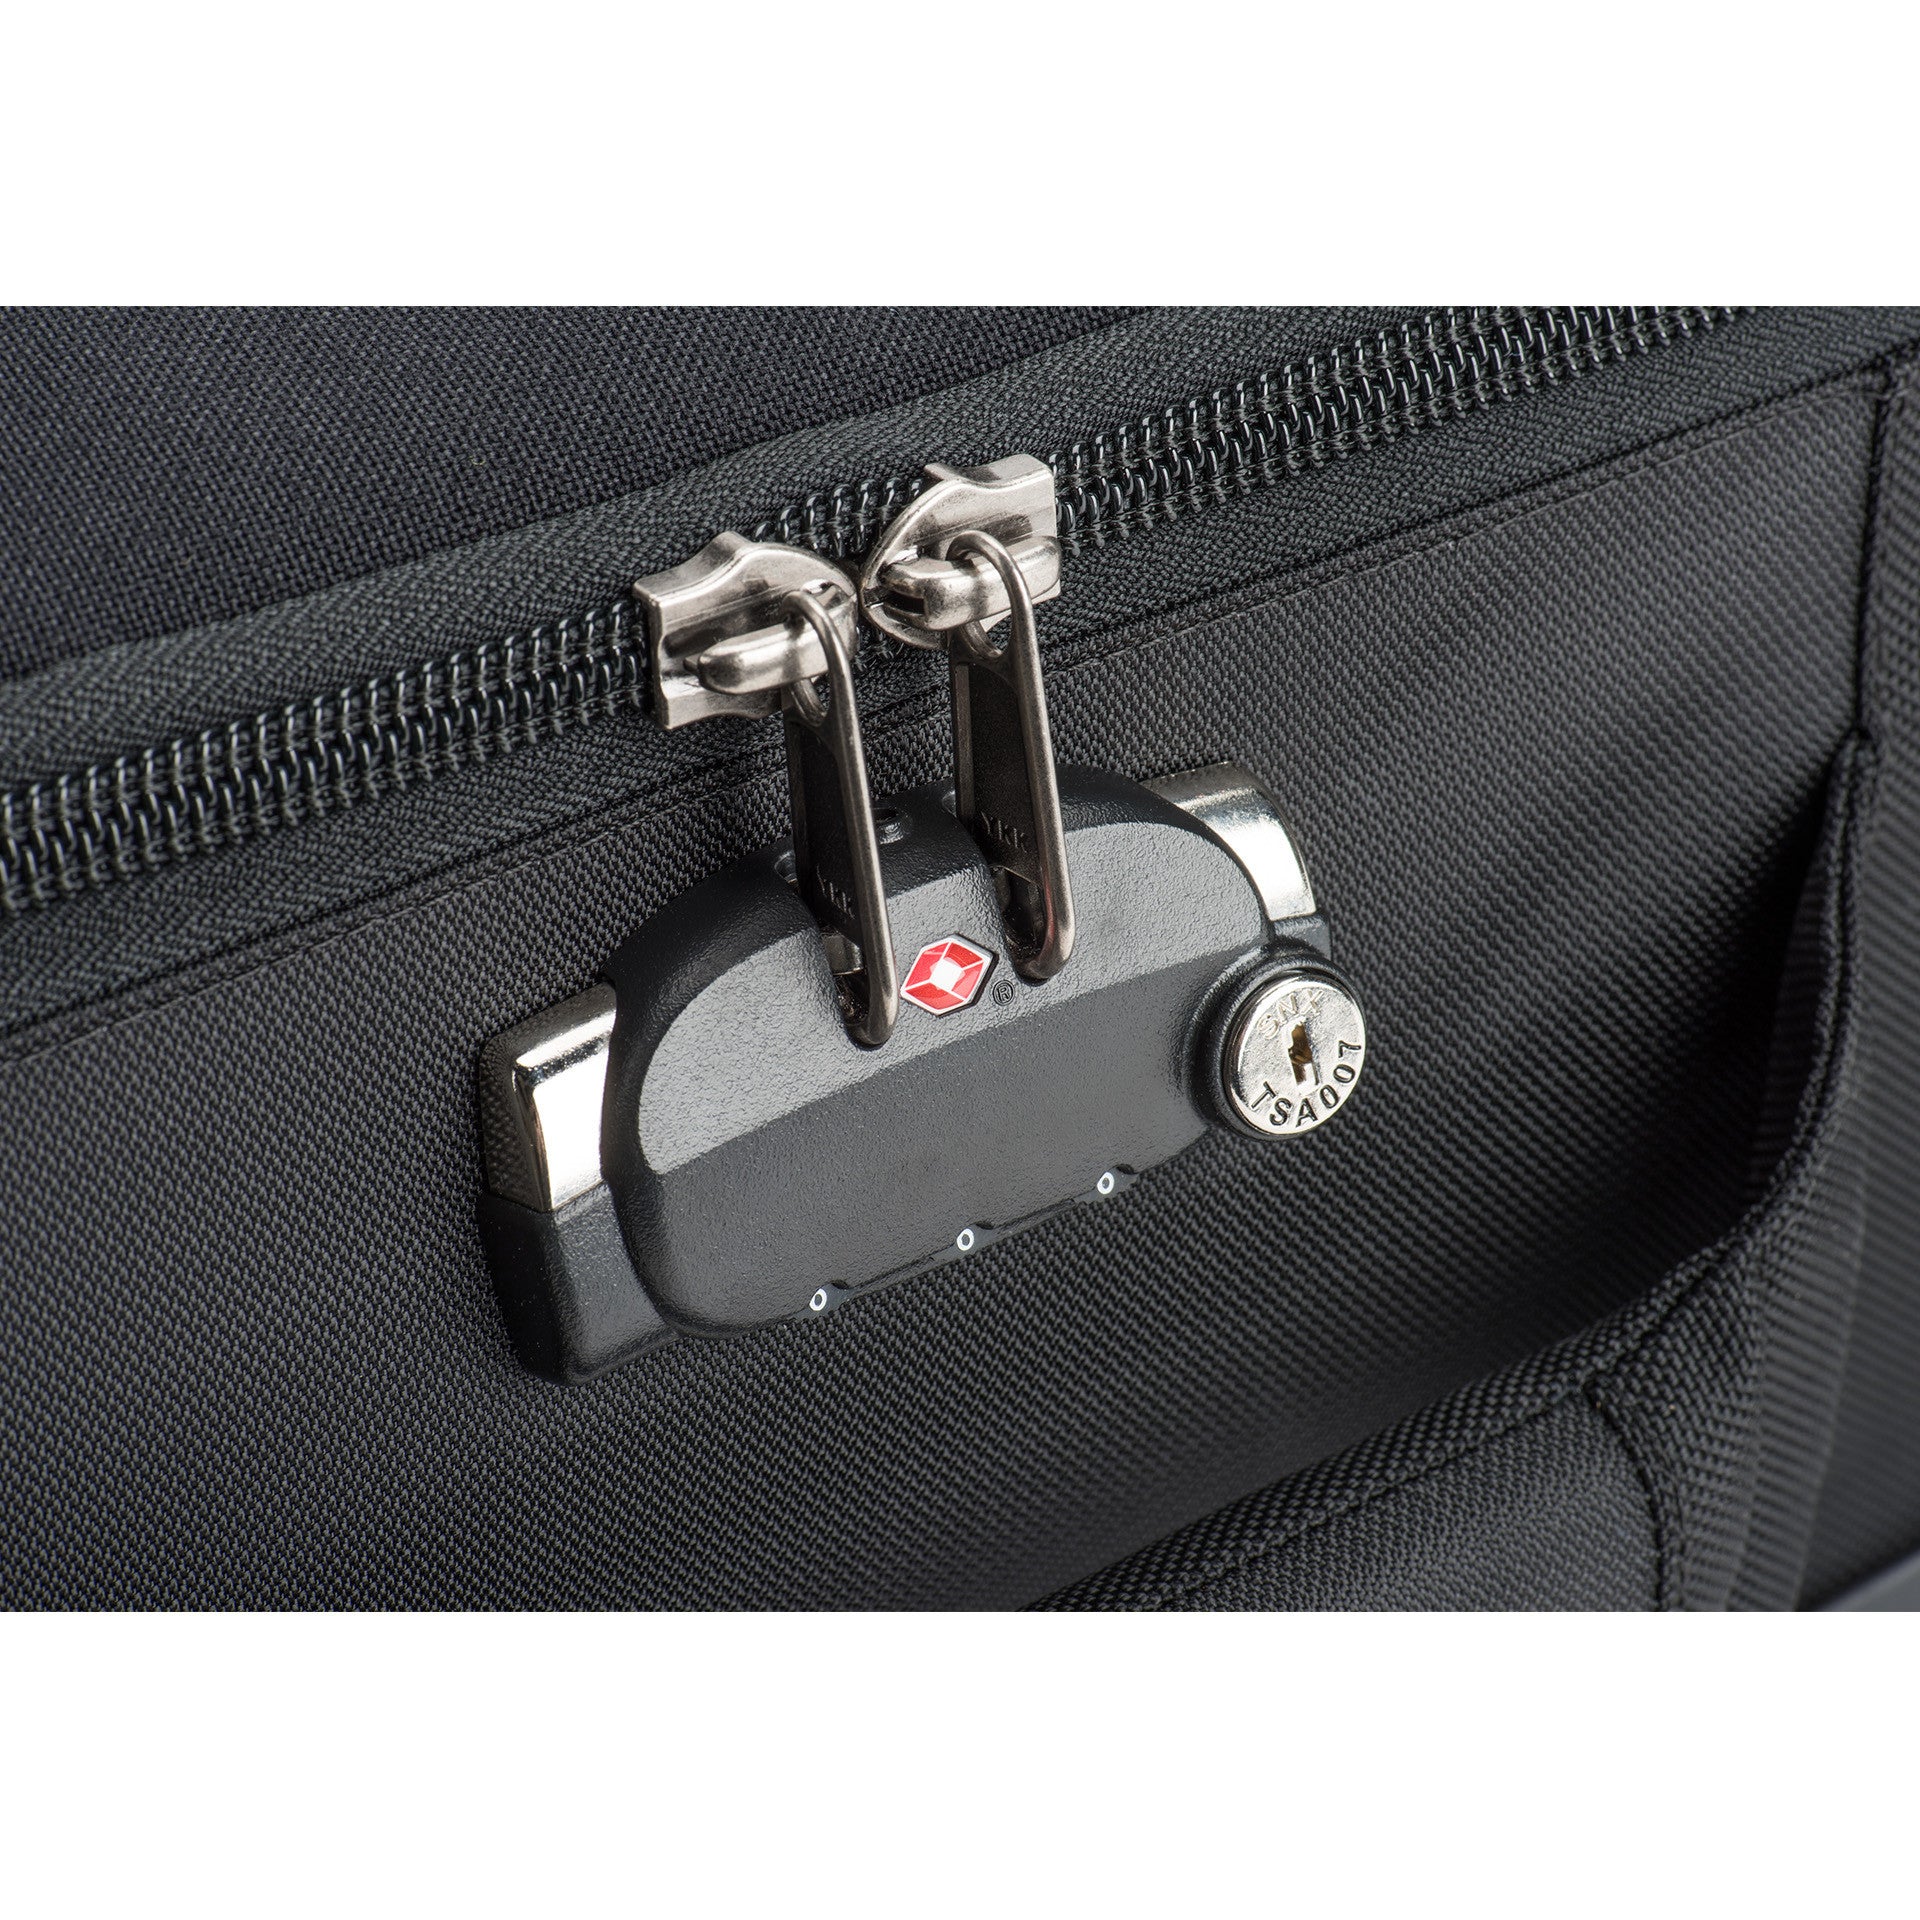 TSA-approved zipper locks for the main compartment, and high-strength coated cable and combination lock for the laptop compartment and securing your bag to an immovable object